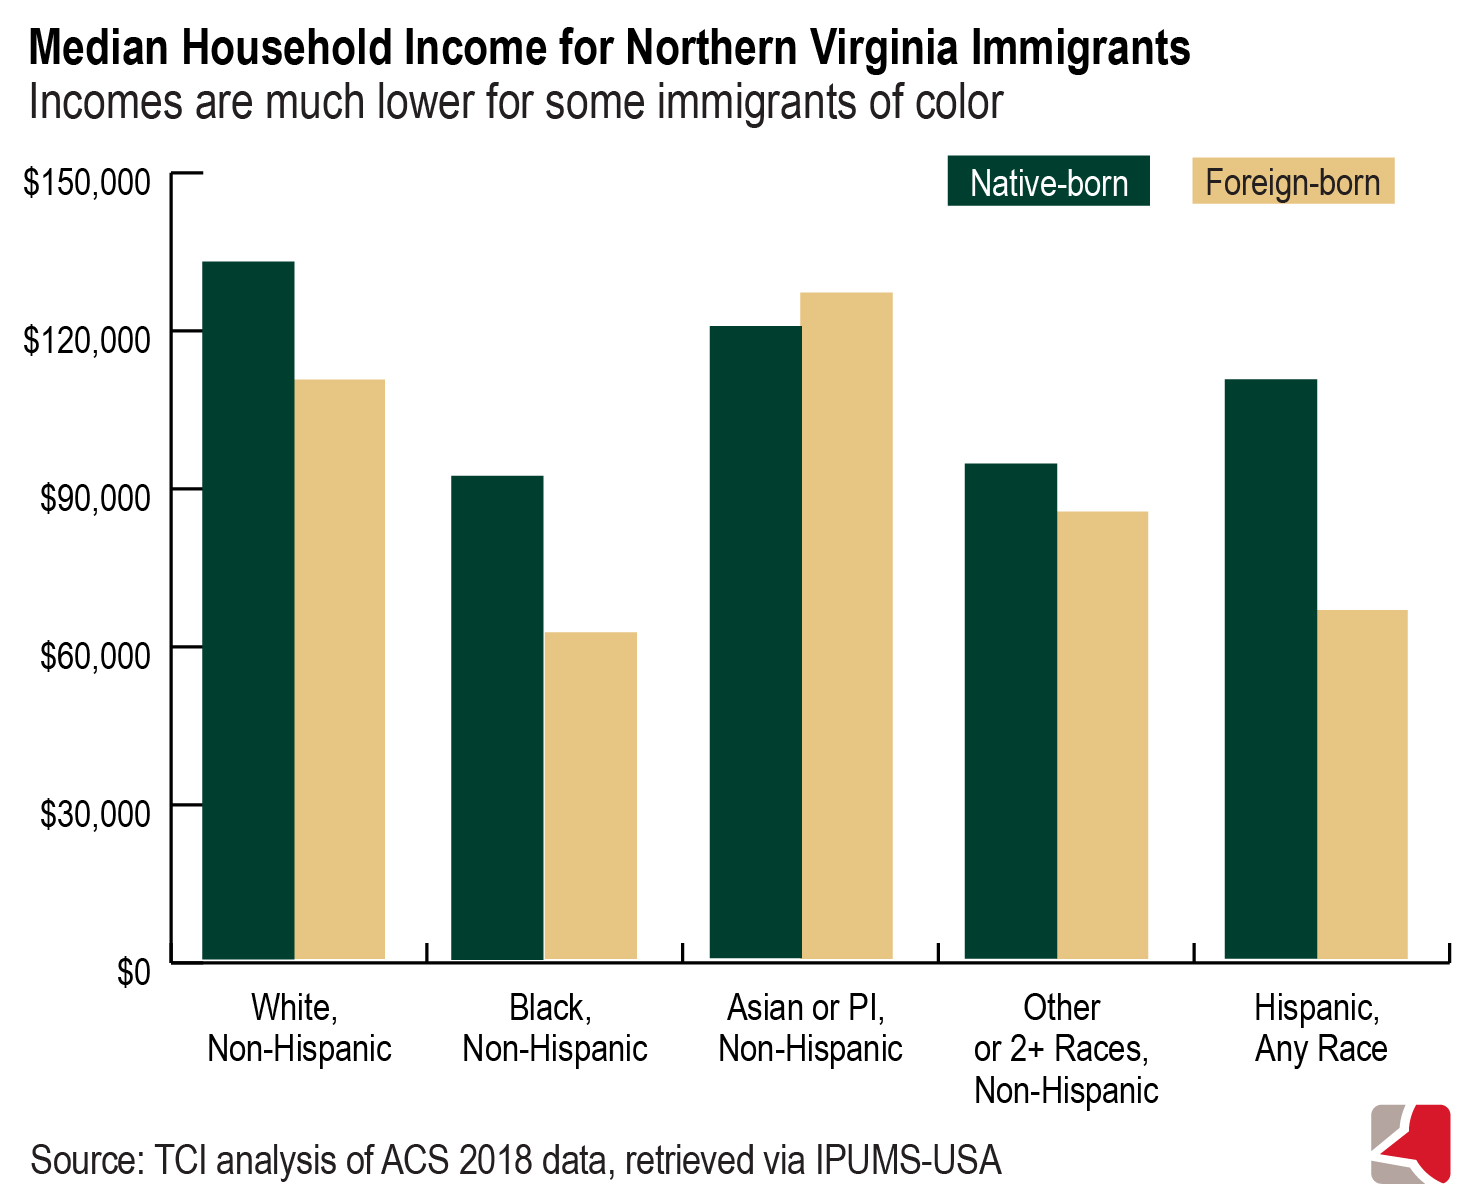 Bar graph showing median household income for Northern Virginia immigrants compared to native-born Virginians by race and ethnicity, based on analysis of ACS 2018 data via IPUMS-USA